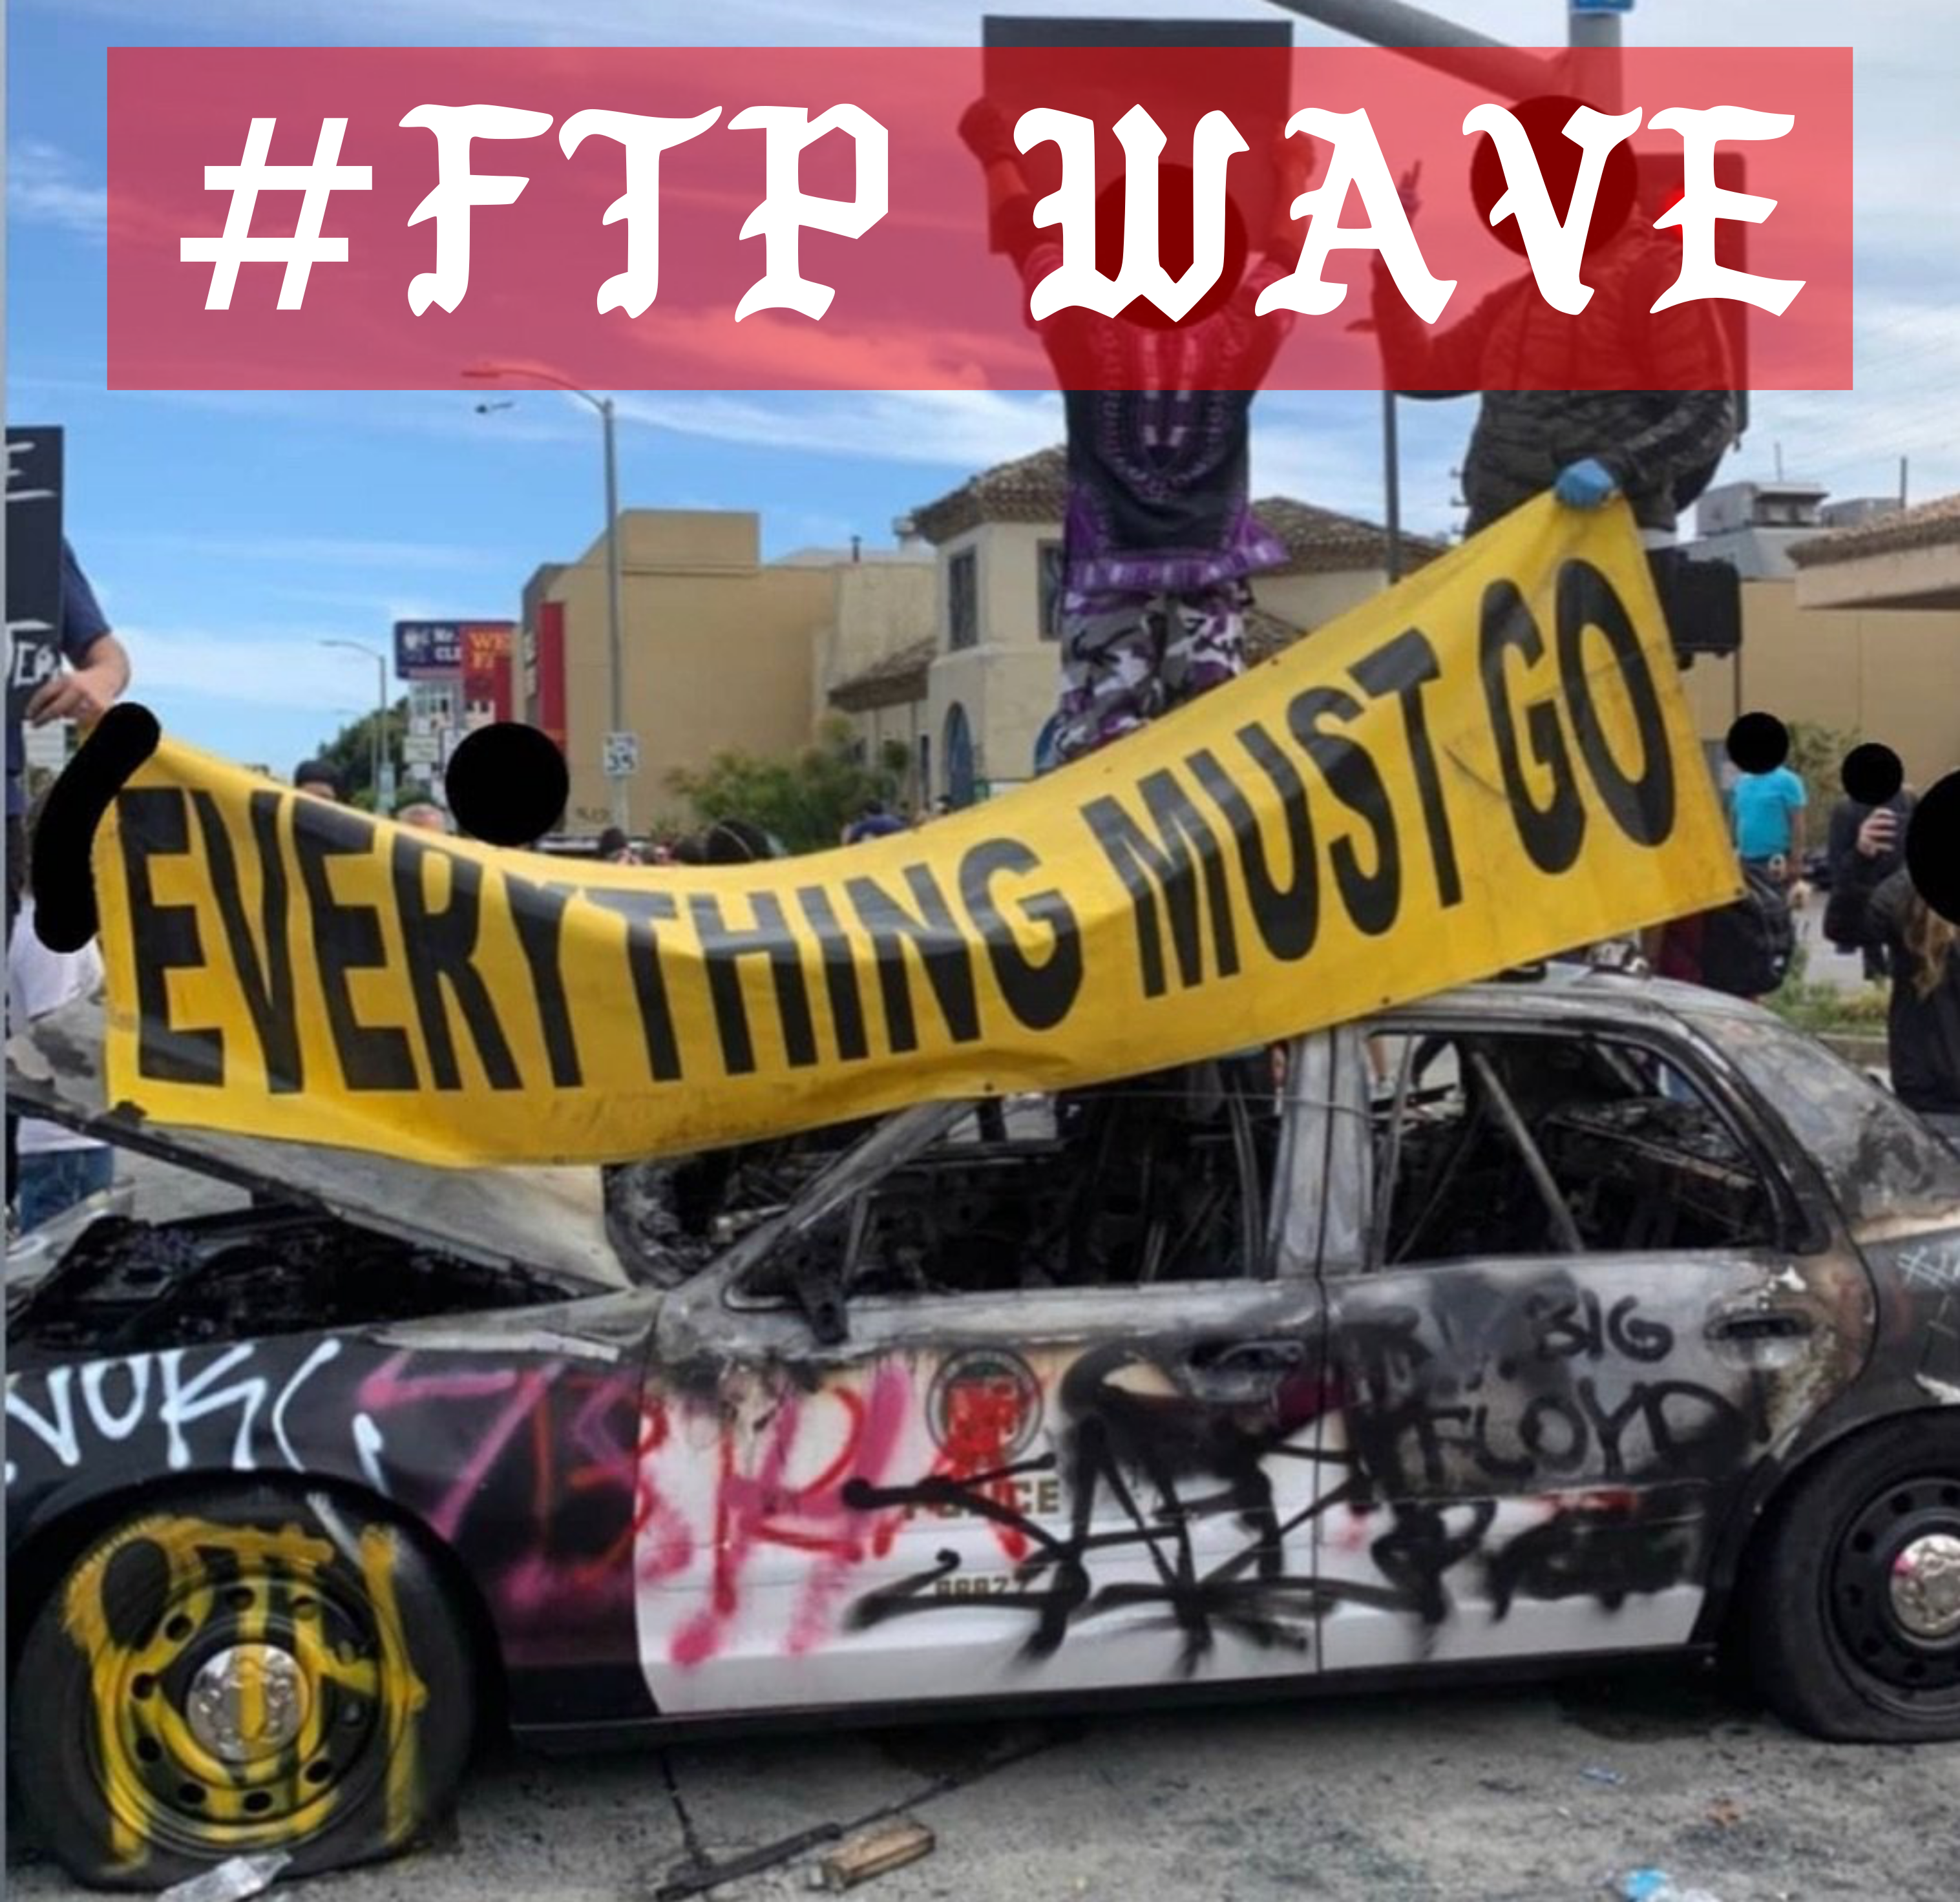 Rioters hold up a yellow-banner that reads "everything must go" atop a burned and vandalized LAPD squad car. Headline text reads "FTP WAVE."